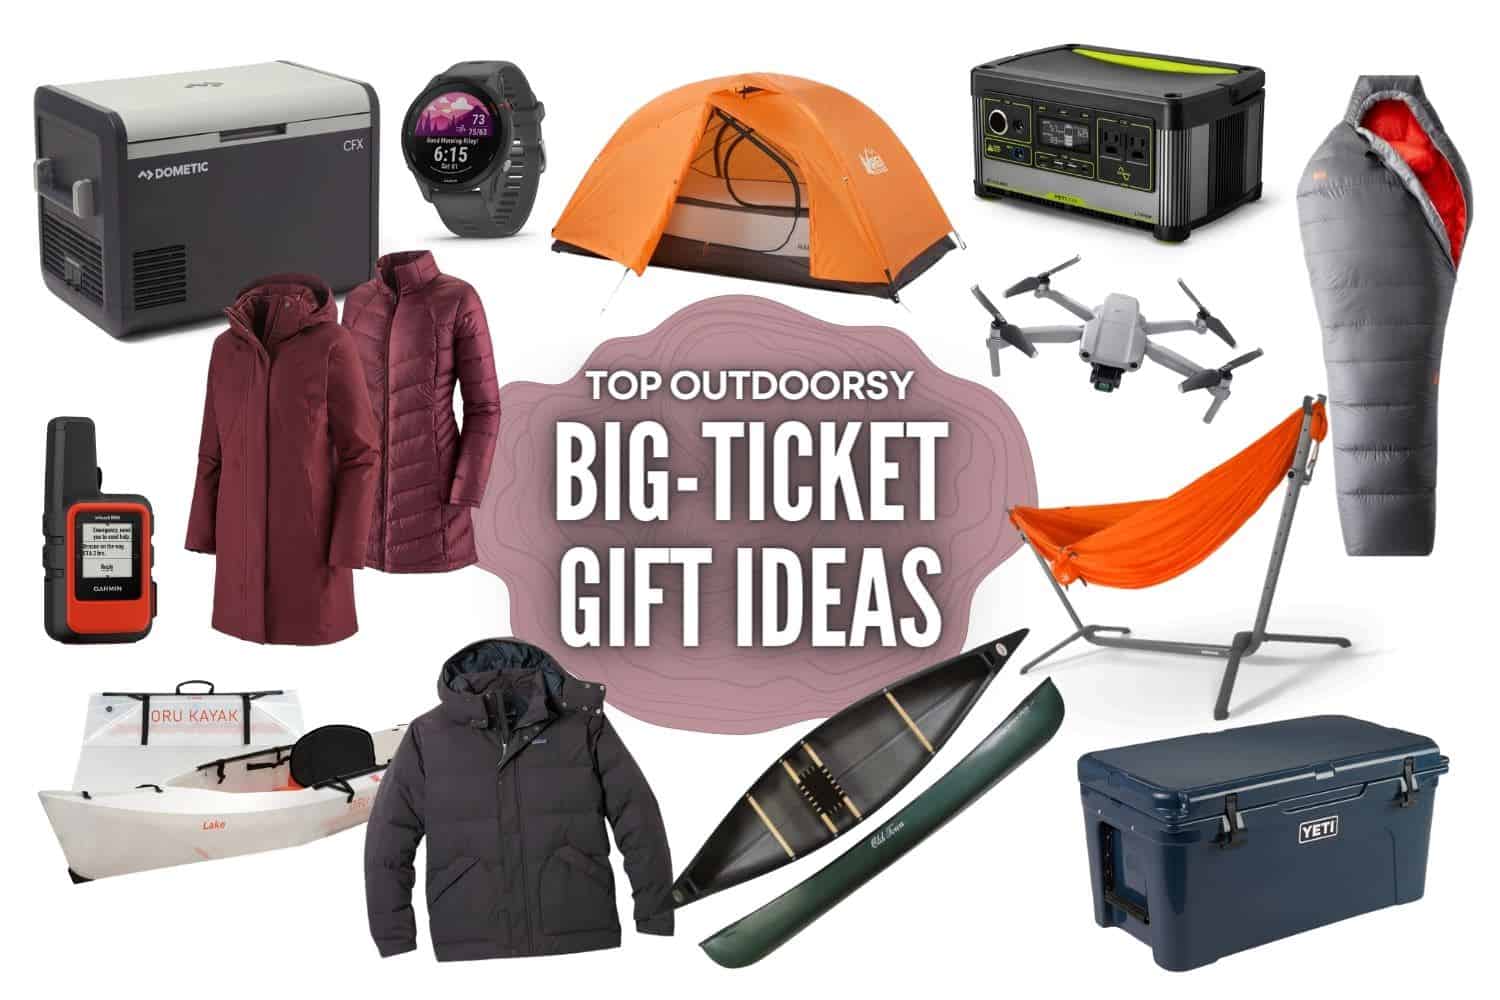 30+ Outdoor Gifts Under $50 For The Budget Adventurer - The Mandagies